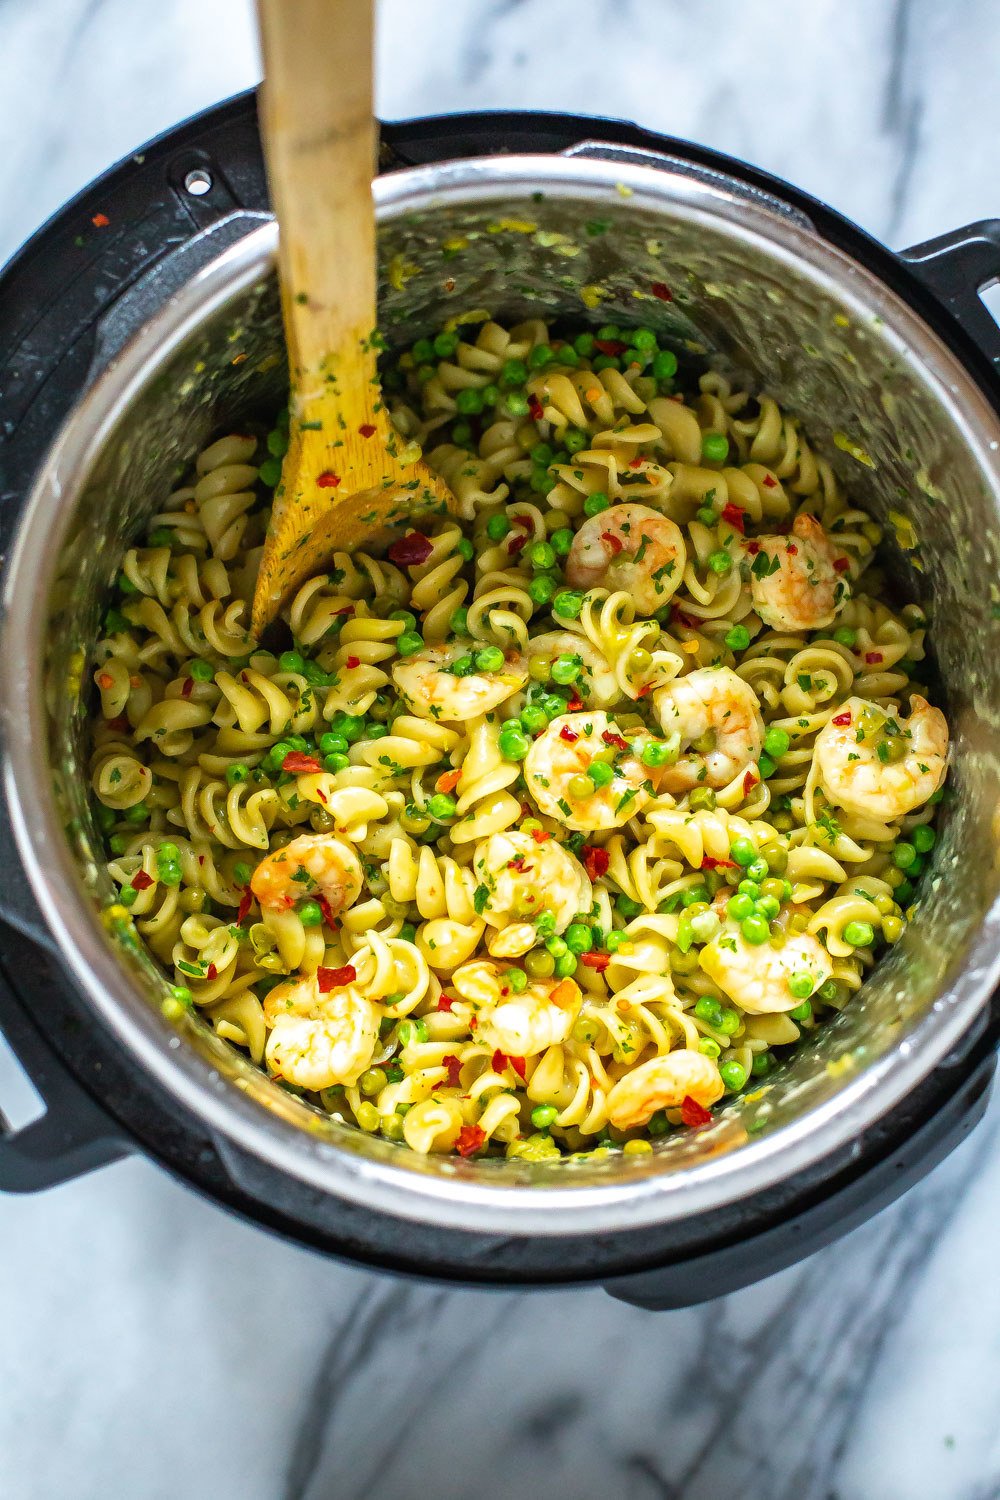 An Instant Pot filled with pasta, shrimp, peas, and red pepper flakes.